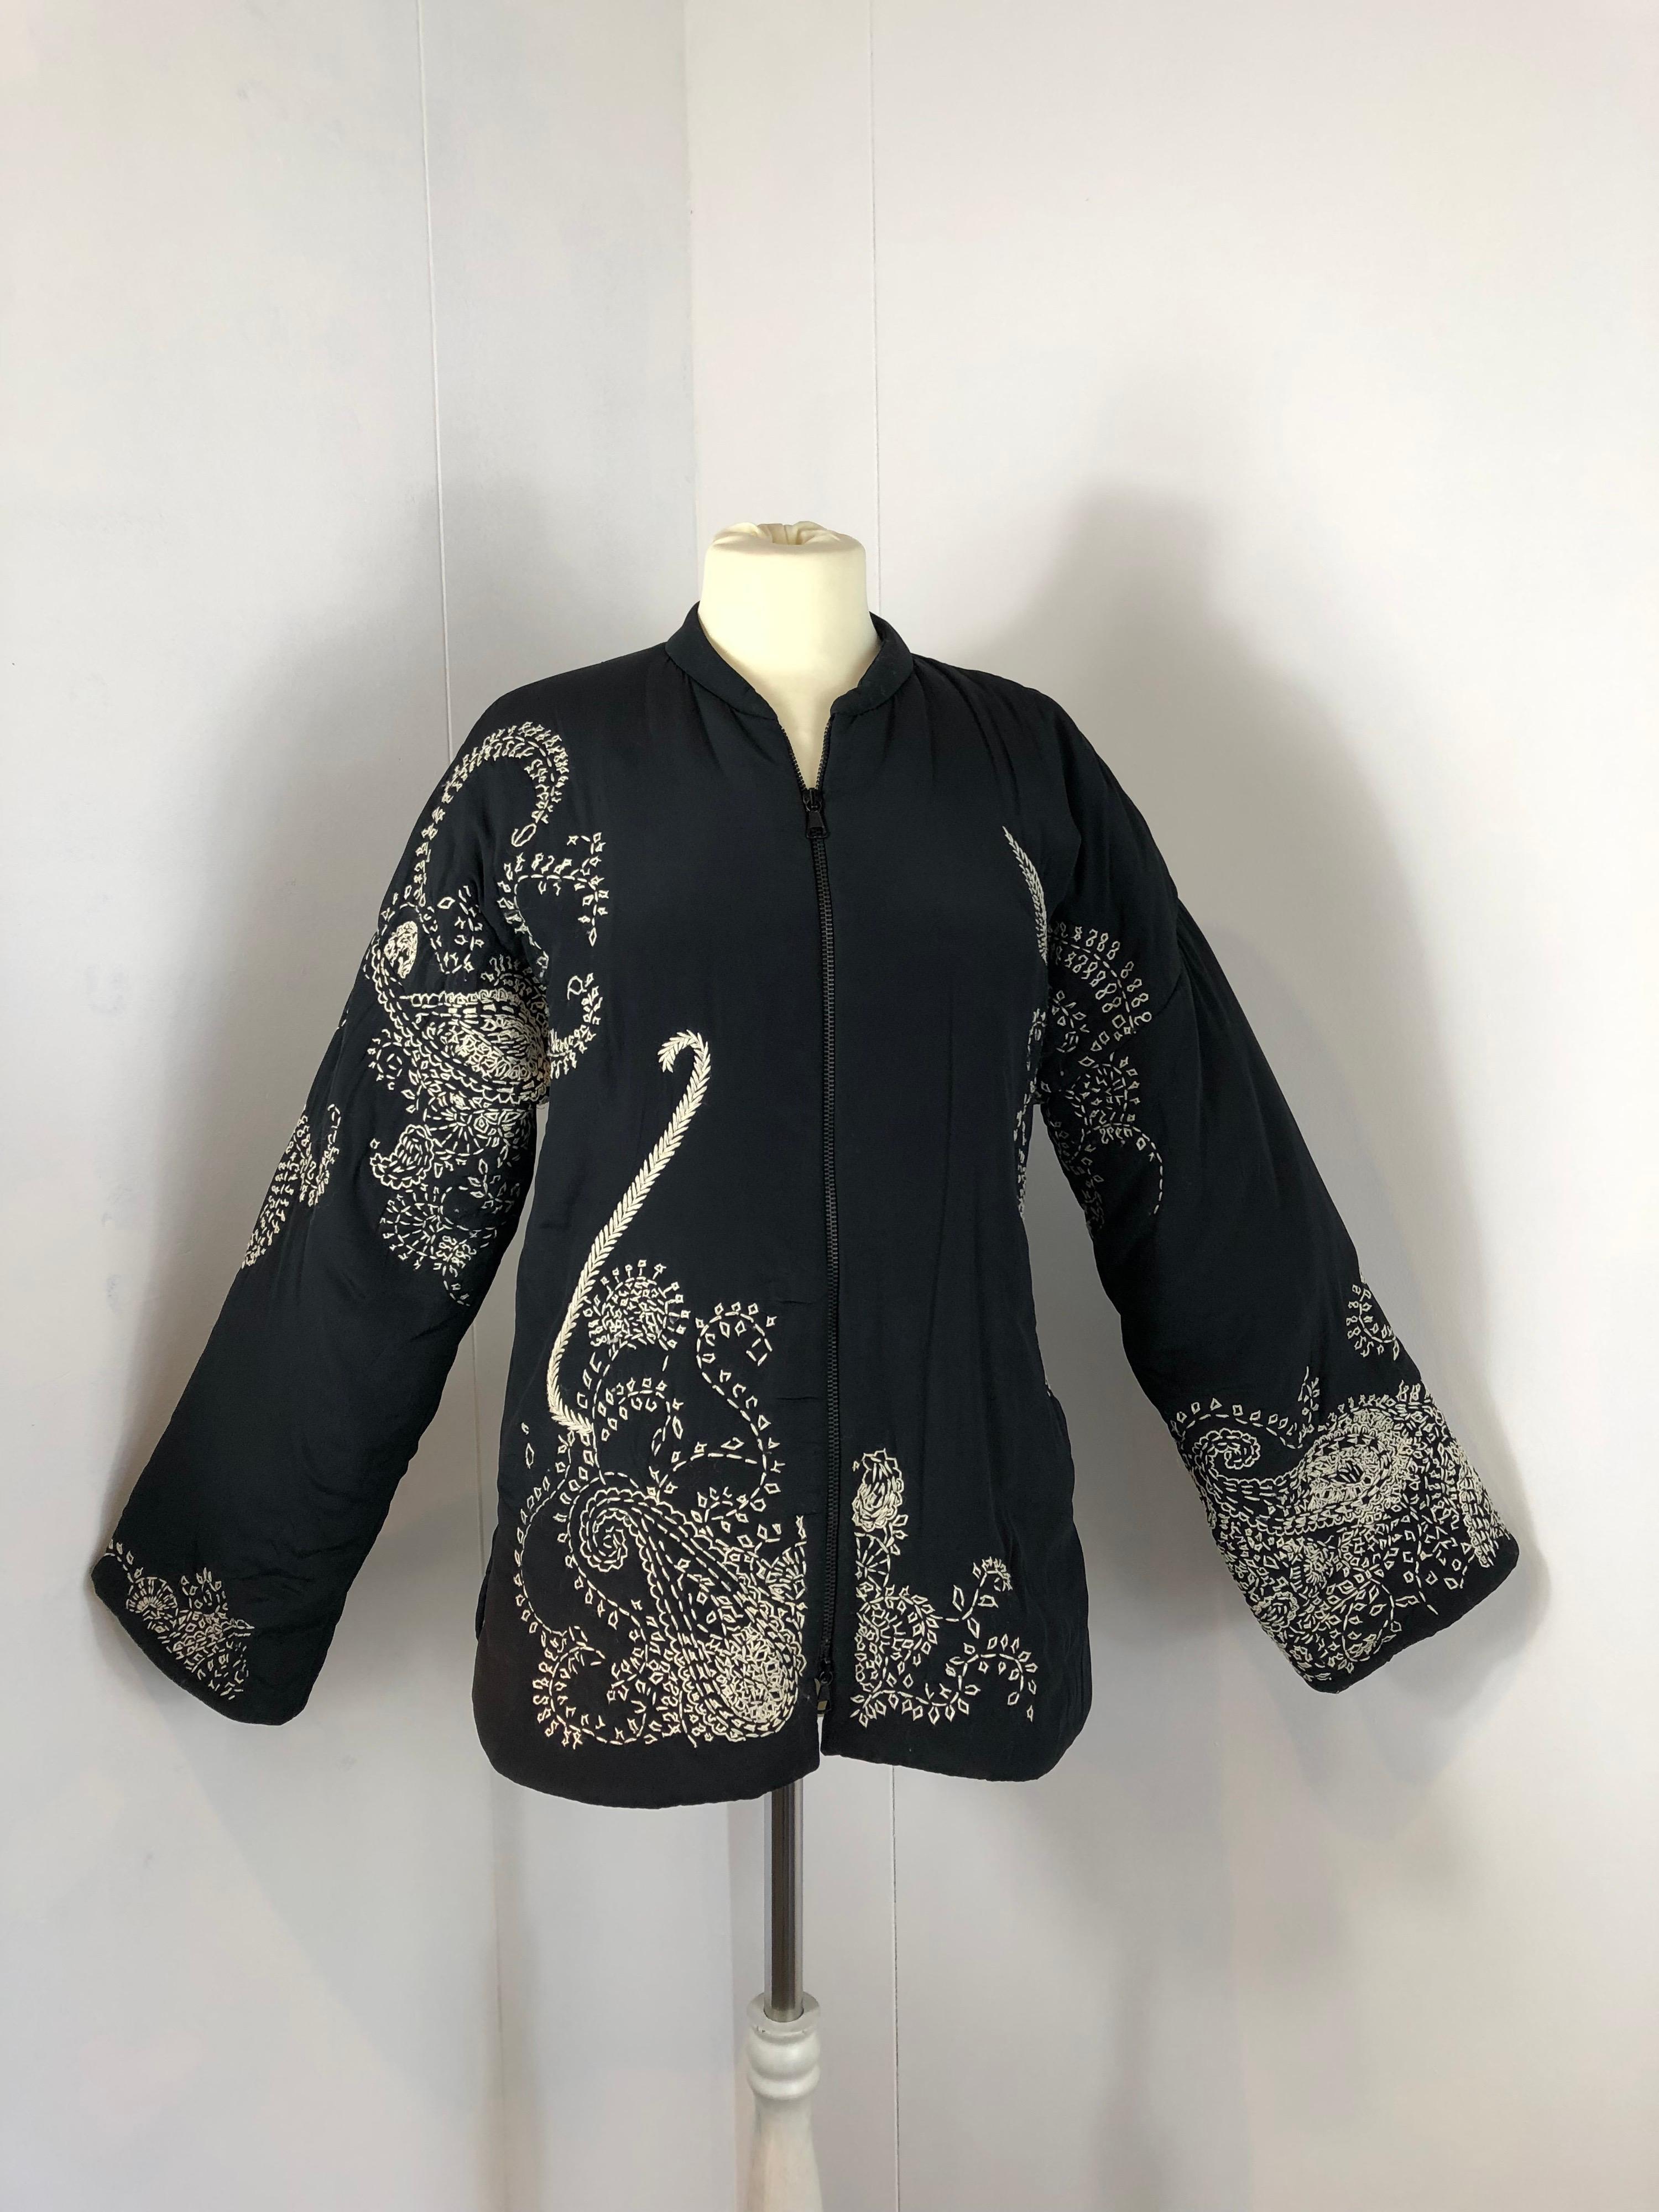 Jean Paul Gaultier , Femme, jacket. 
Main Fabric is a mix between acetate and silk. Very soft at the touch. Second fabric is cotton.
Lining is polyester. 
Featuring 2 frontal pockets, zip closure and amazing white embroidery. 
Size 40